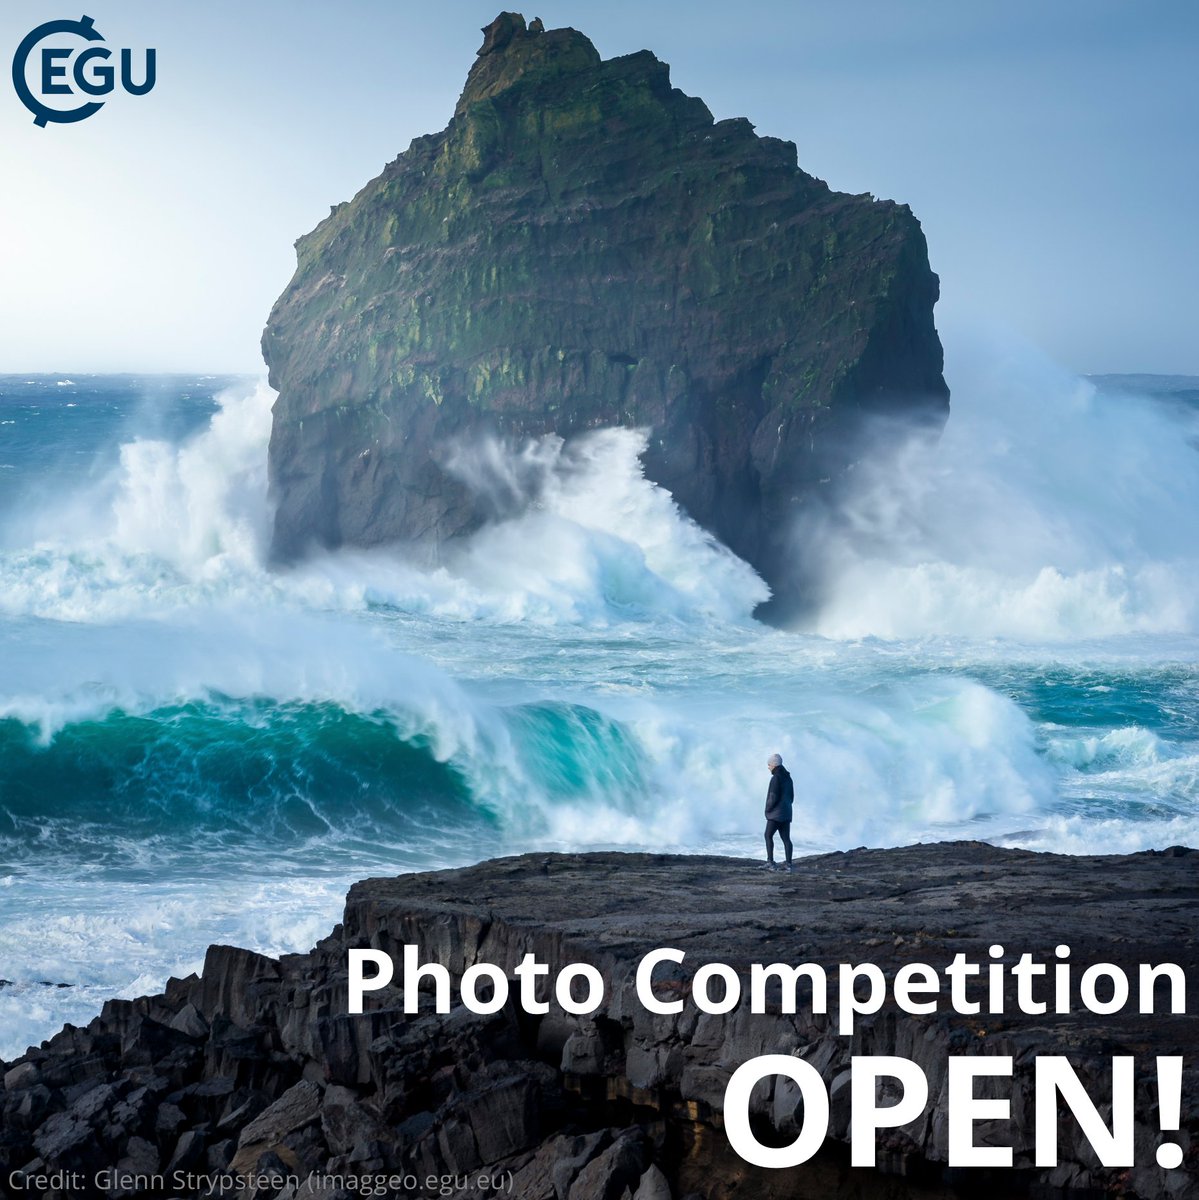 Have you taken a great geoscience photo or video? Want to win free registration to the General Assembly in 2025 & impress your peers? Why not enter the #EGU24 #PhotoCompetition! Anyone registered can enter by 28 March 2024. Submit your entry TODAY: egu.eu/8XKCMX/